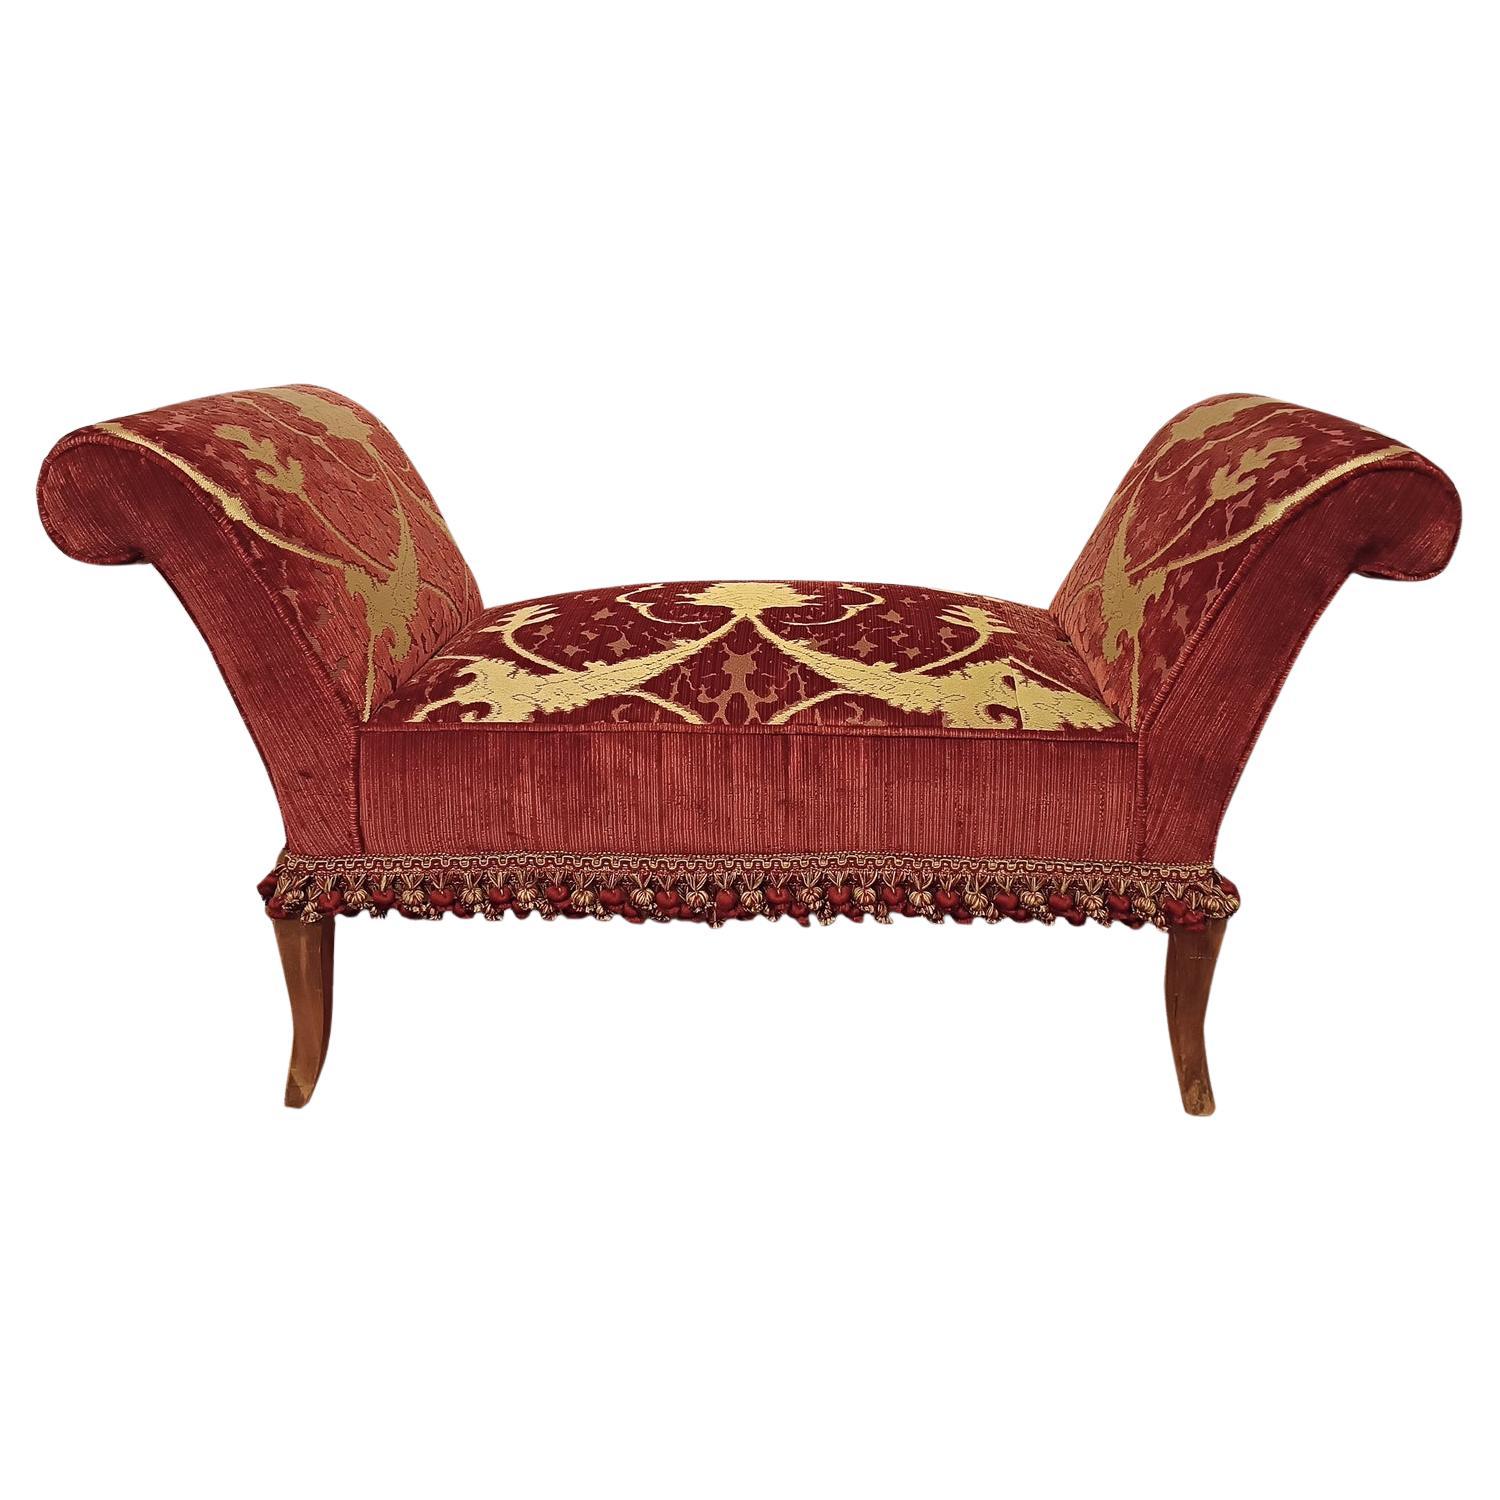 FIRST HALF OF THE 19th CENTURY UPHOLSTERED BENCH LOUIS PHILIPPE